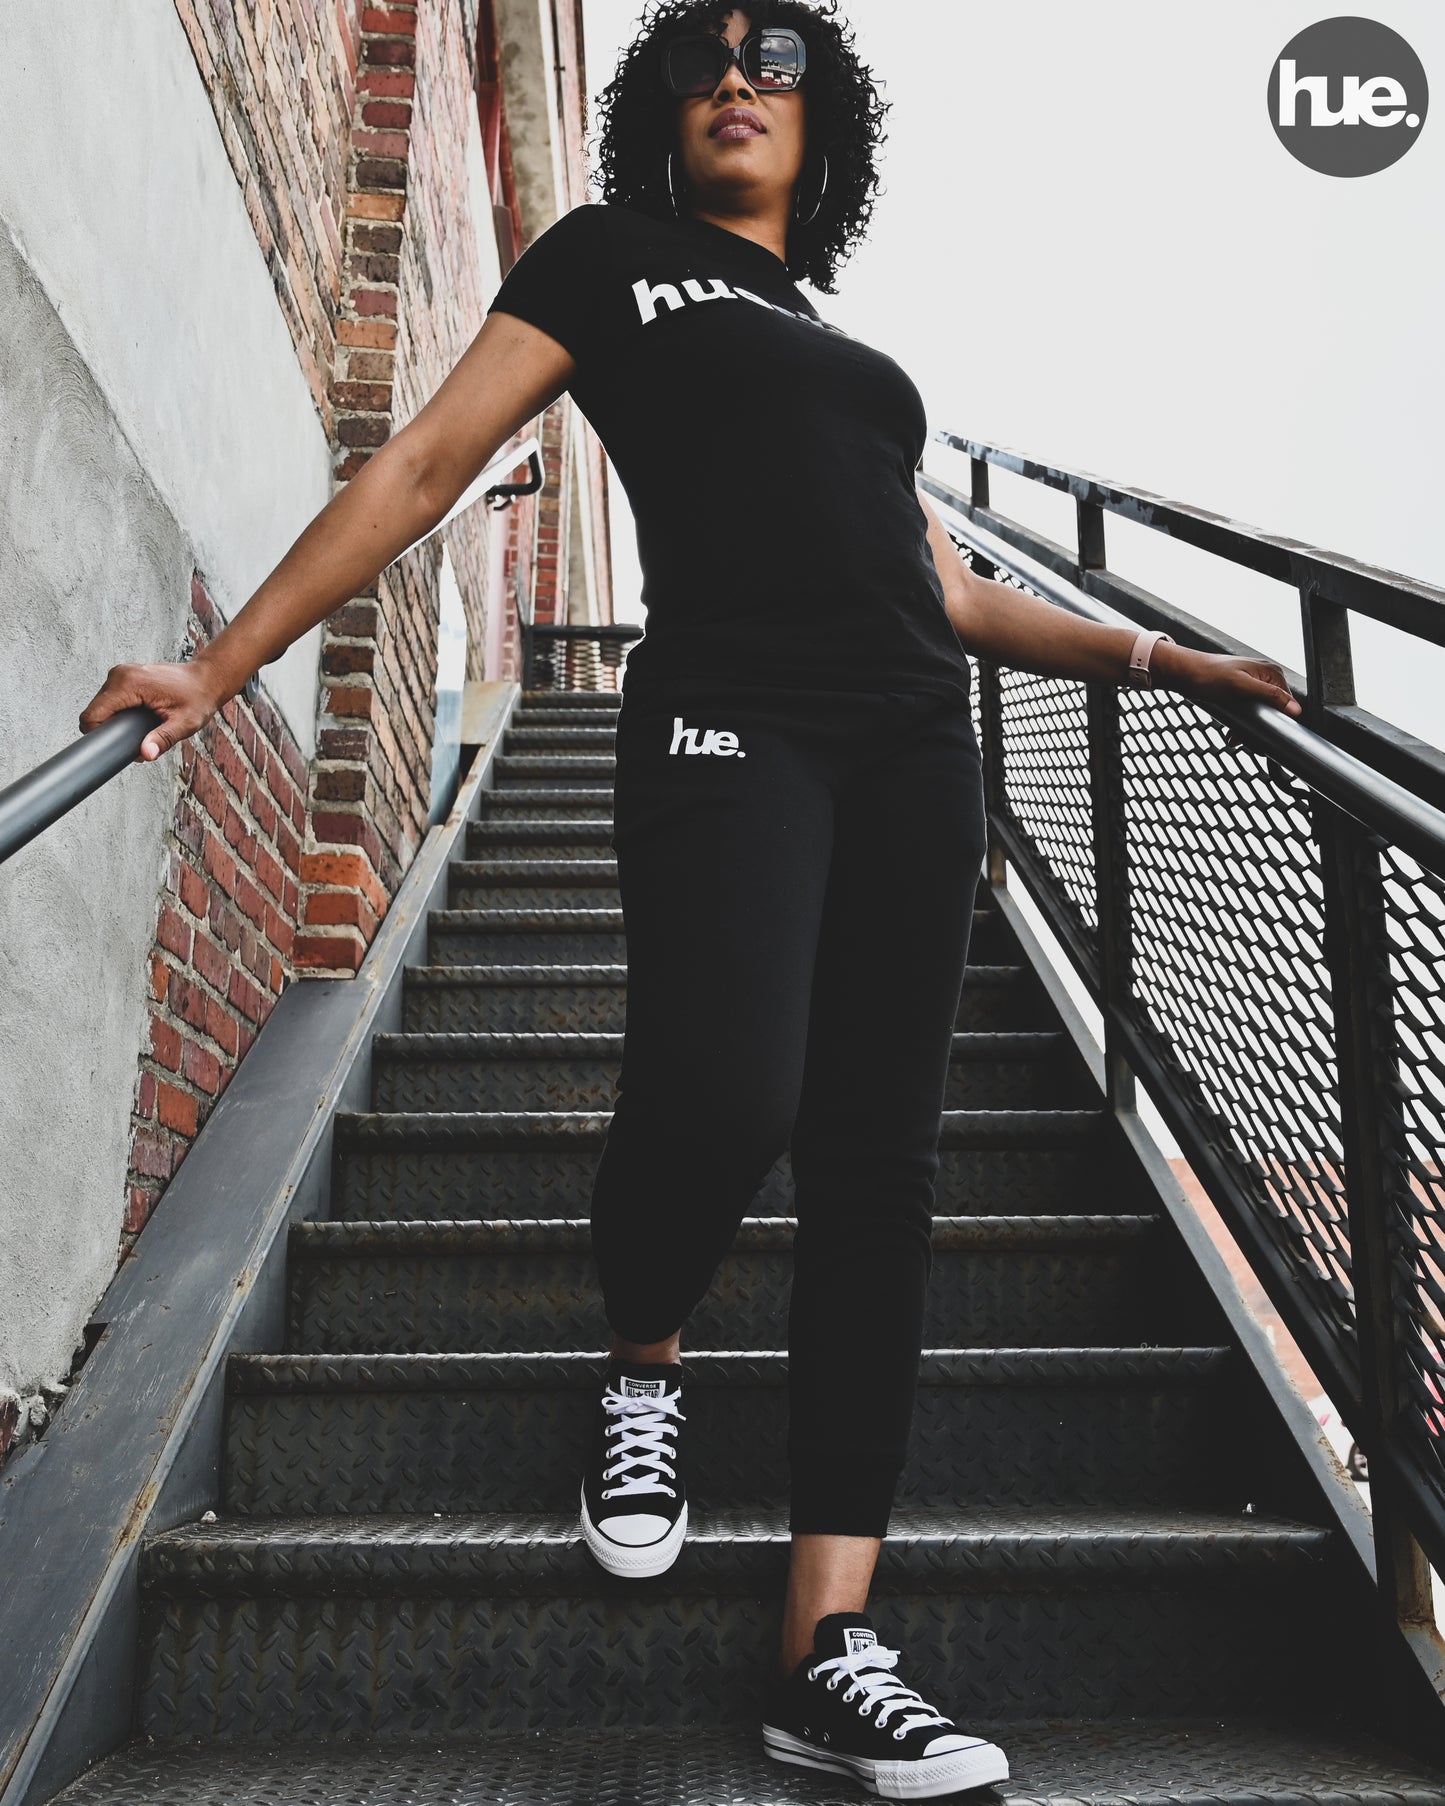 'Black Ice Hue' Collection Women's Joggers (Ladies) | Black *LIMITED QUANTITIES*